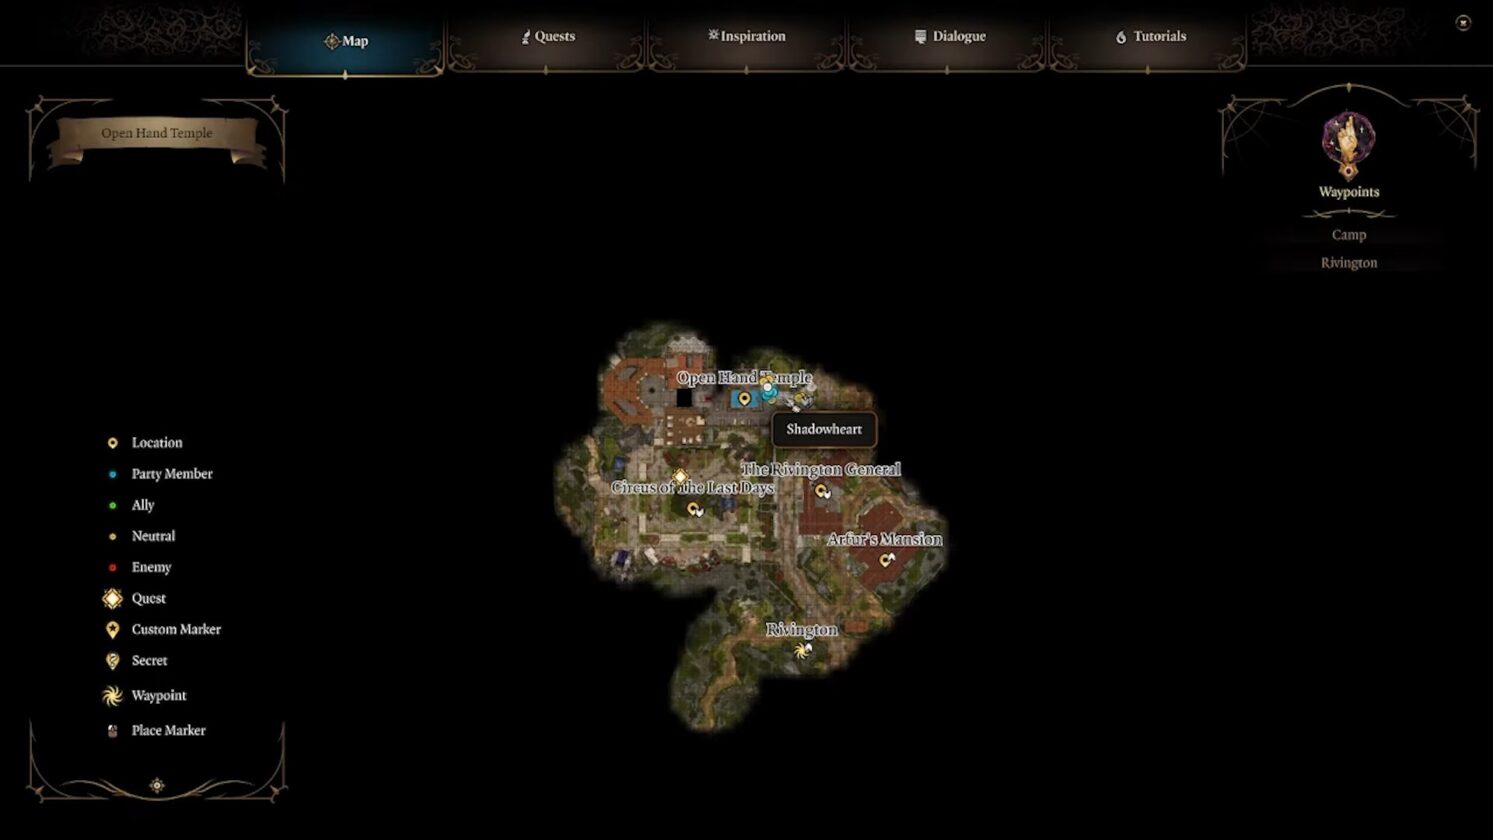 Open Hand Temple location map in BG3